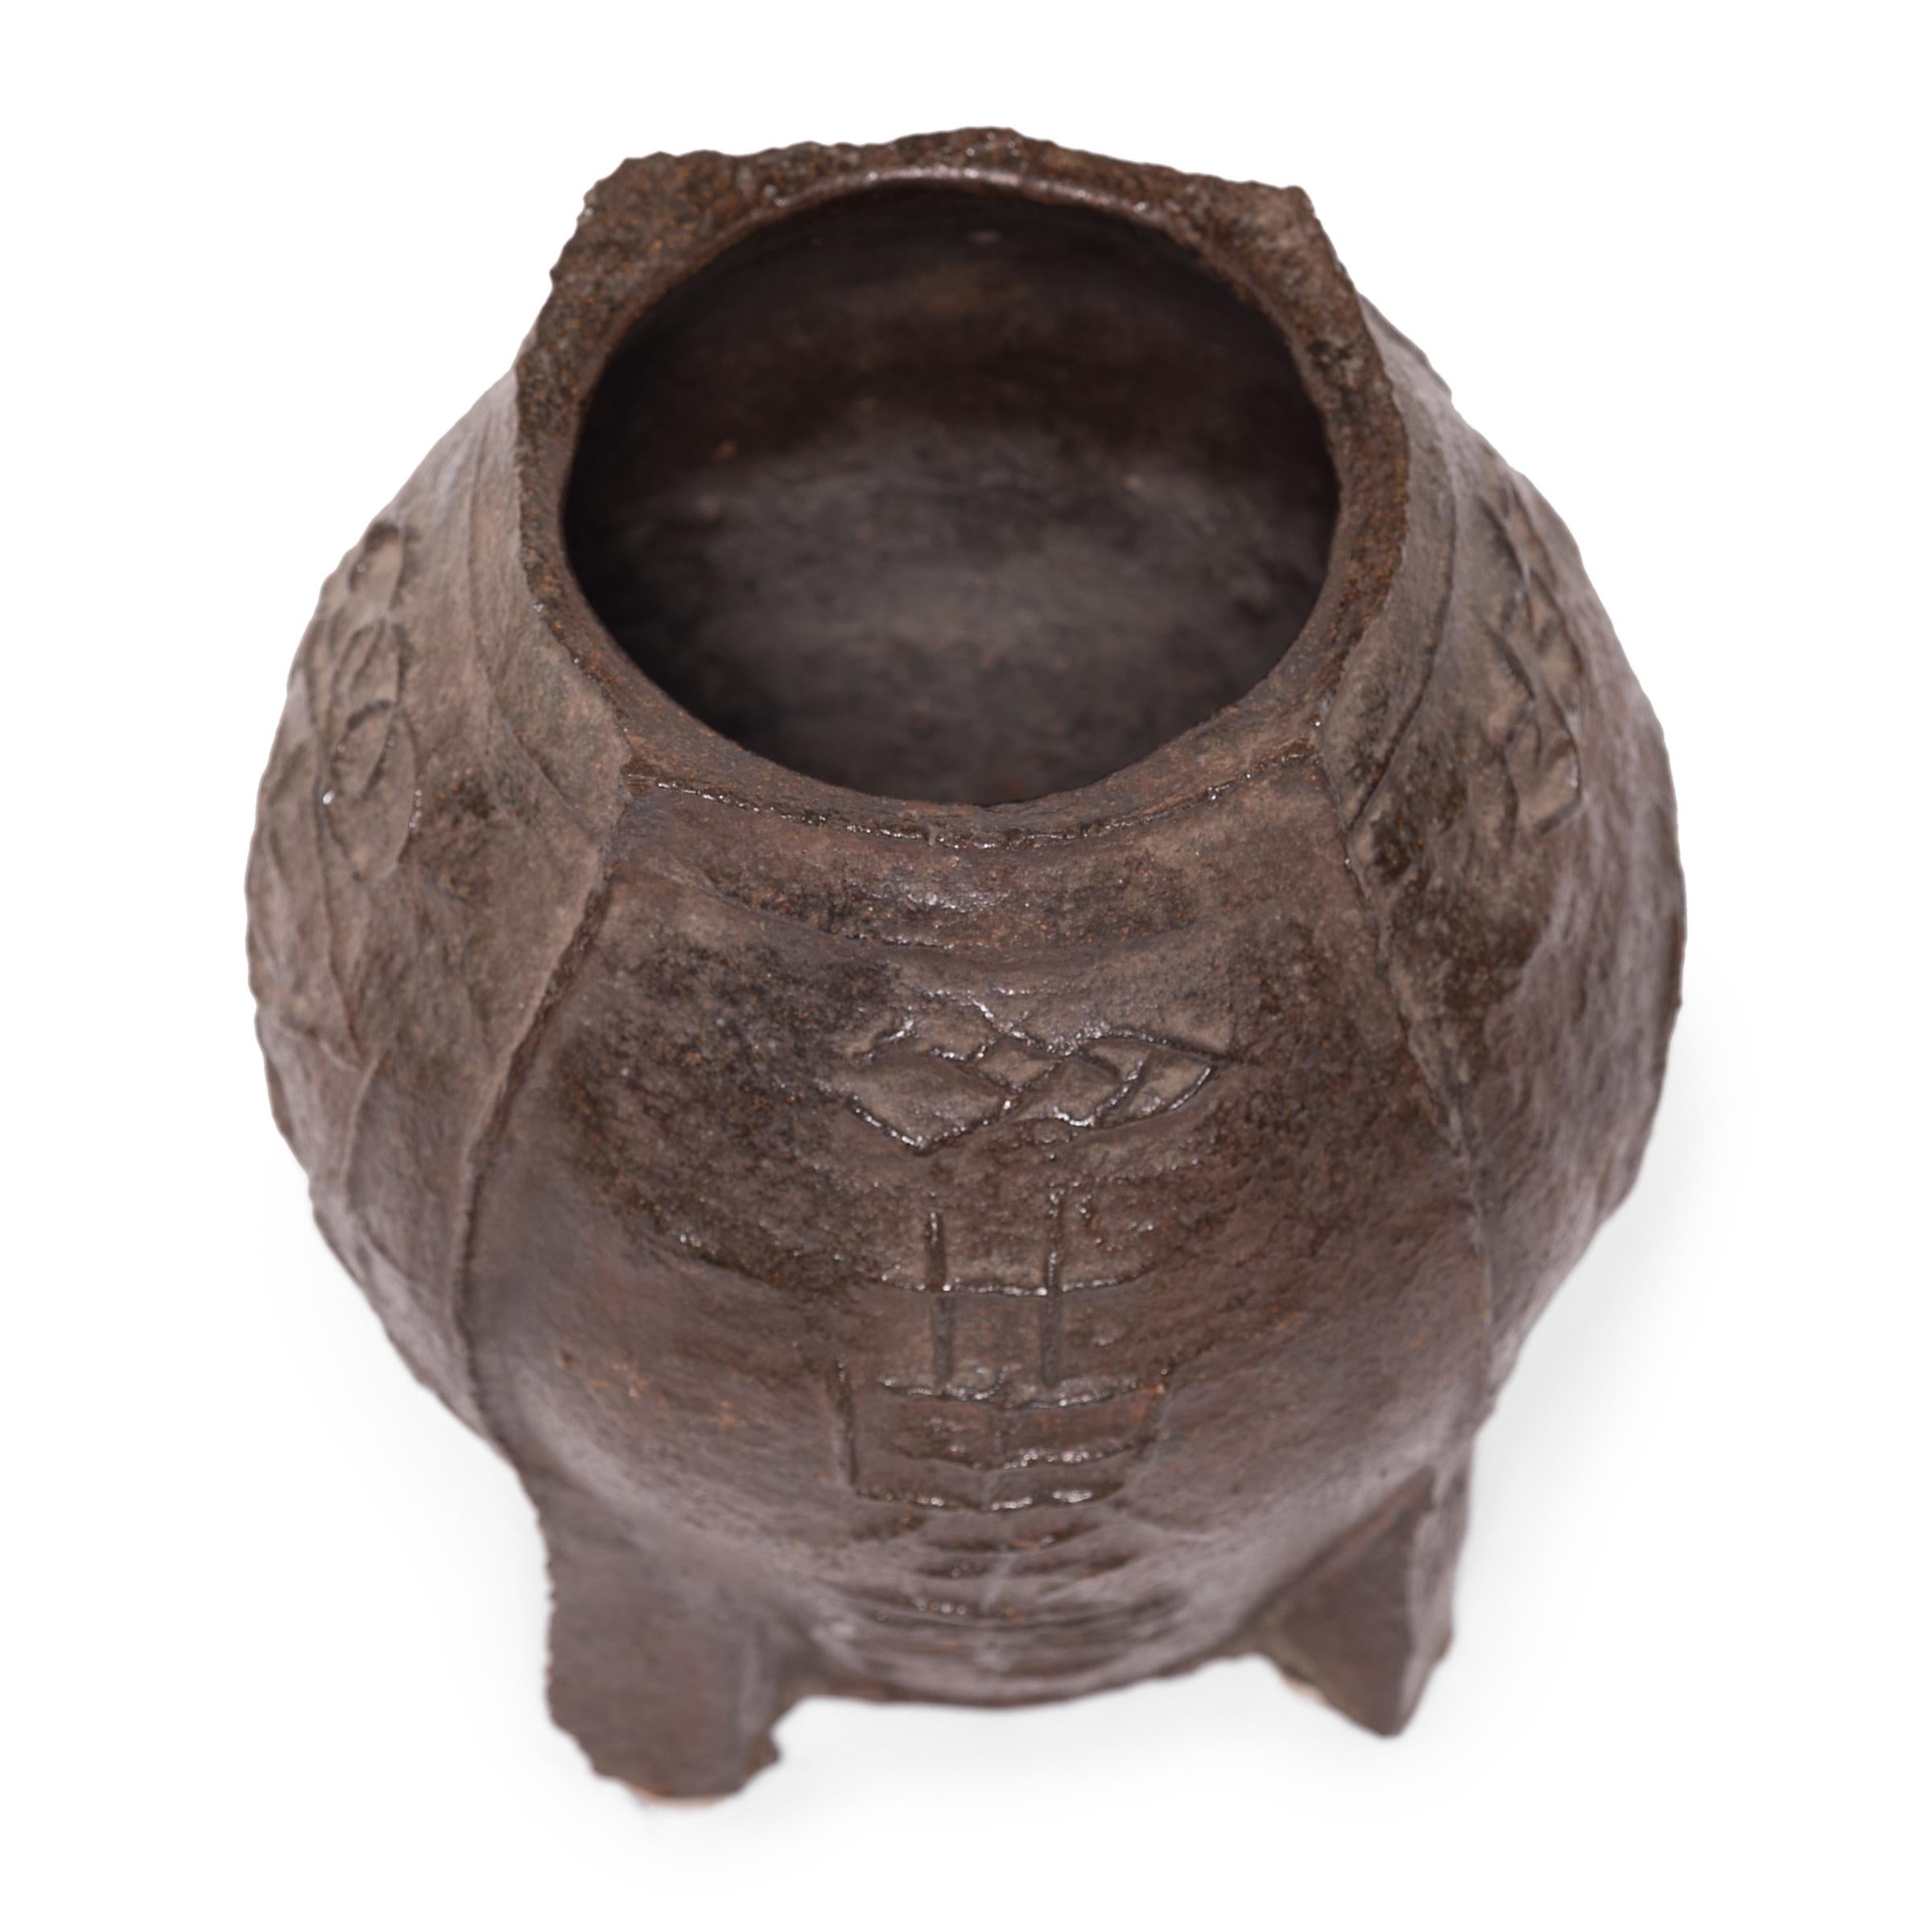 Cast in iron with a raised design, this vintage mortar was originally used in a traditional apothecary to create herbal medicines. The swelling shape allowed free movement of a pestle to effectively grind, mash, and macerate herbs and seeds in